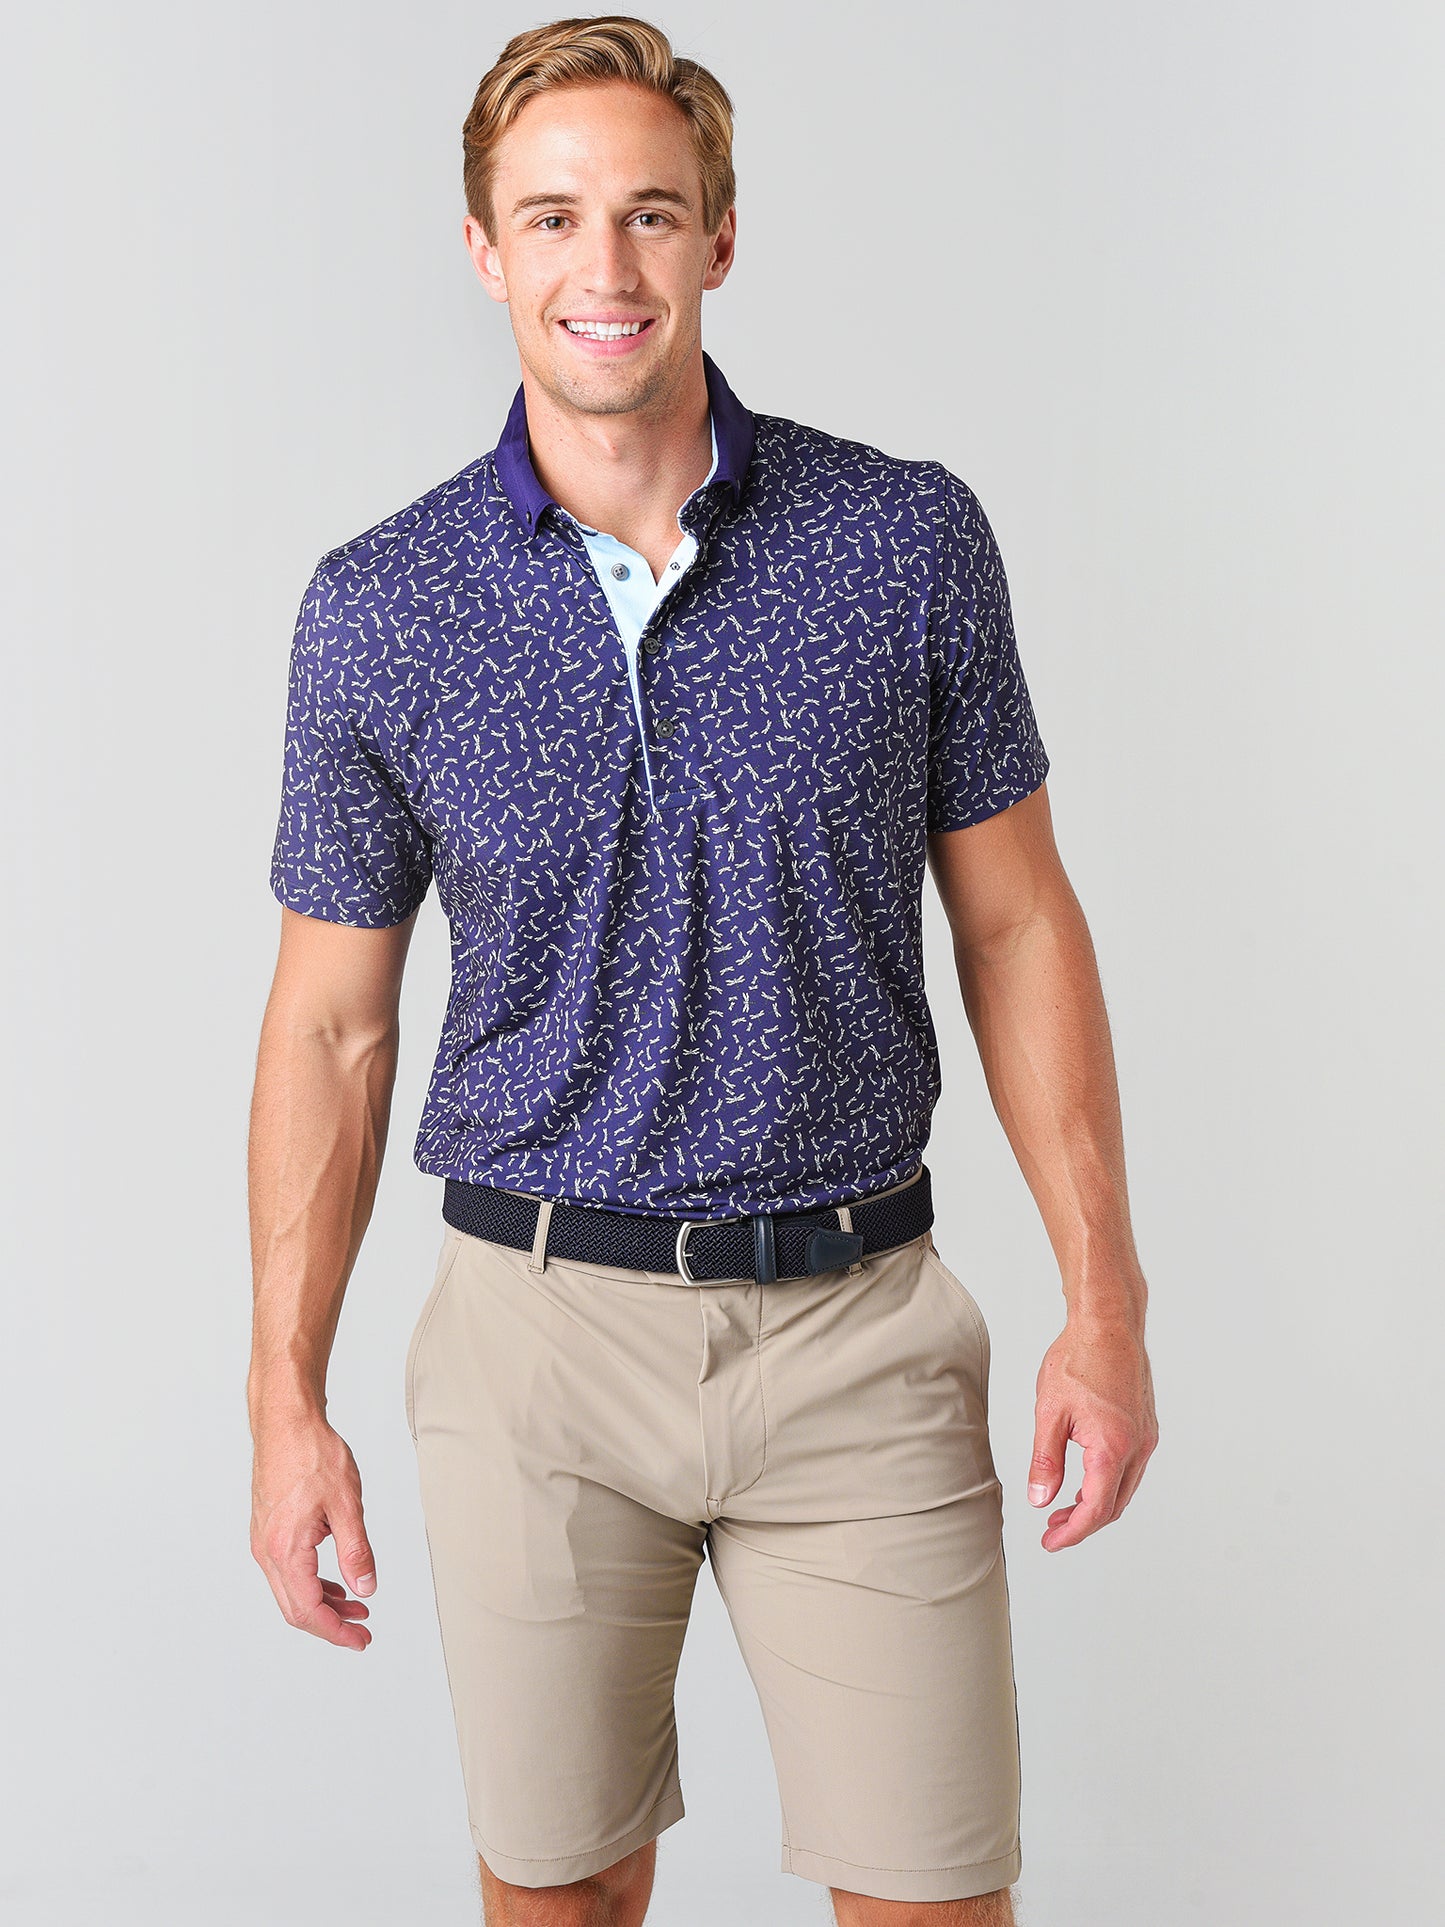 Greyson Men's Lord of the Flies Polo